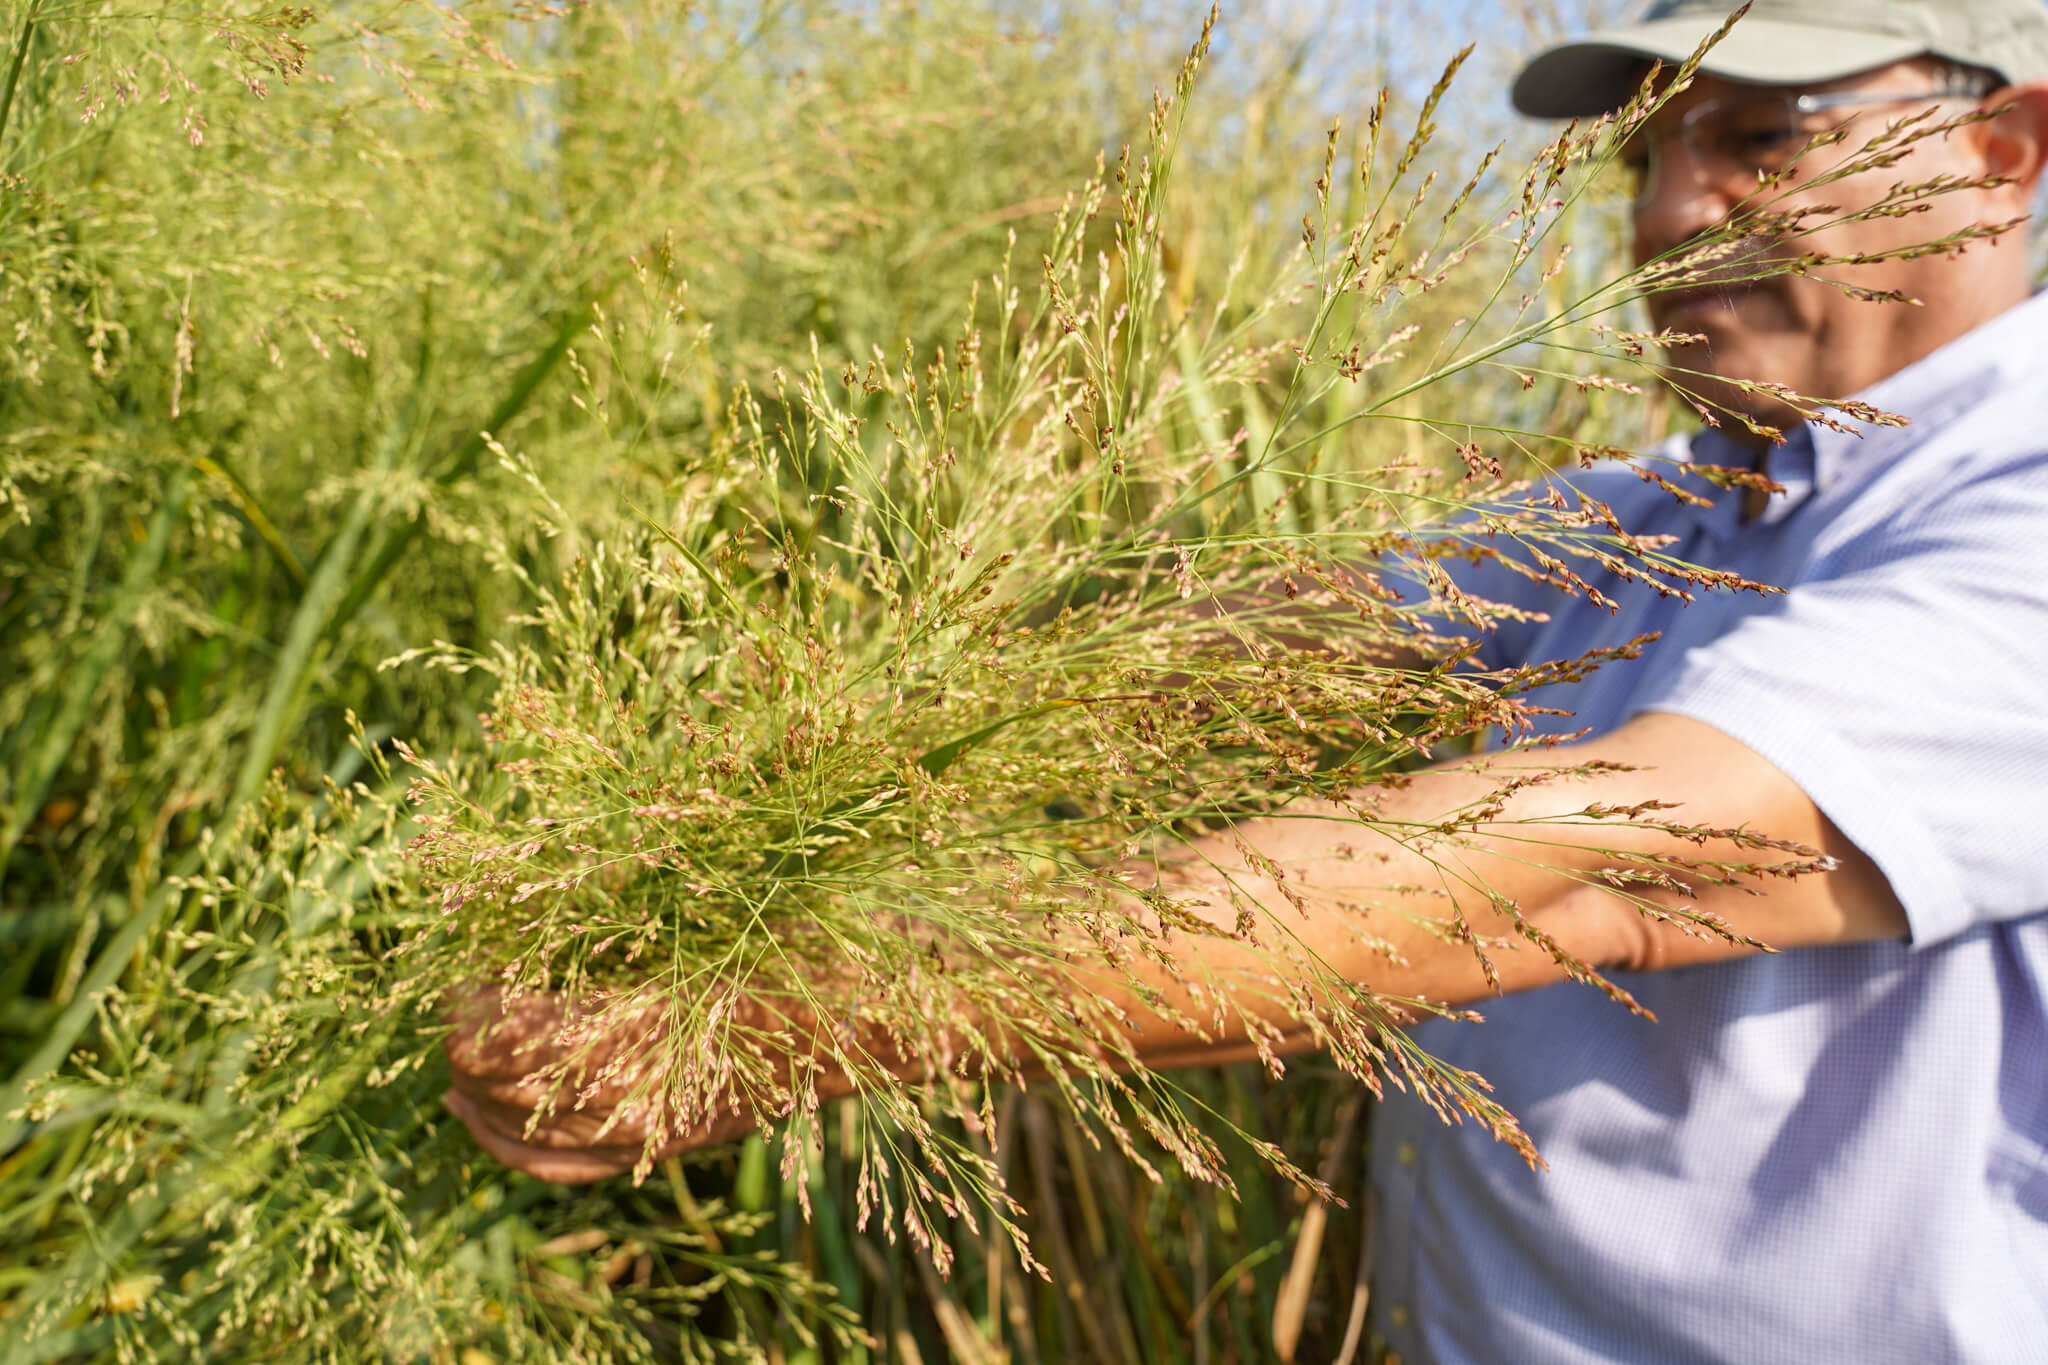 Associate Professor Ali Missaoui, one of several University of Georgia faculty associated with the Center for Bioenergy Innovation (CBI) at Oak Ridge National Laboratory, breeds switchgrass as a potential feedstock for biofuels at UGA’s Iron Horse Farm in Watkinsville. The switchgrass program is just one of the multiple UGA research projects intended to help the transportation industry move toward a more sustainable future. (Photo by Lauren Corcino)